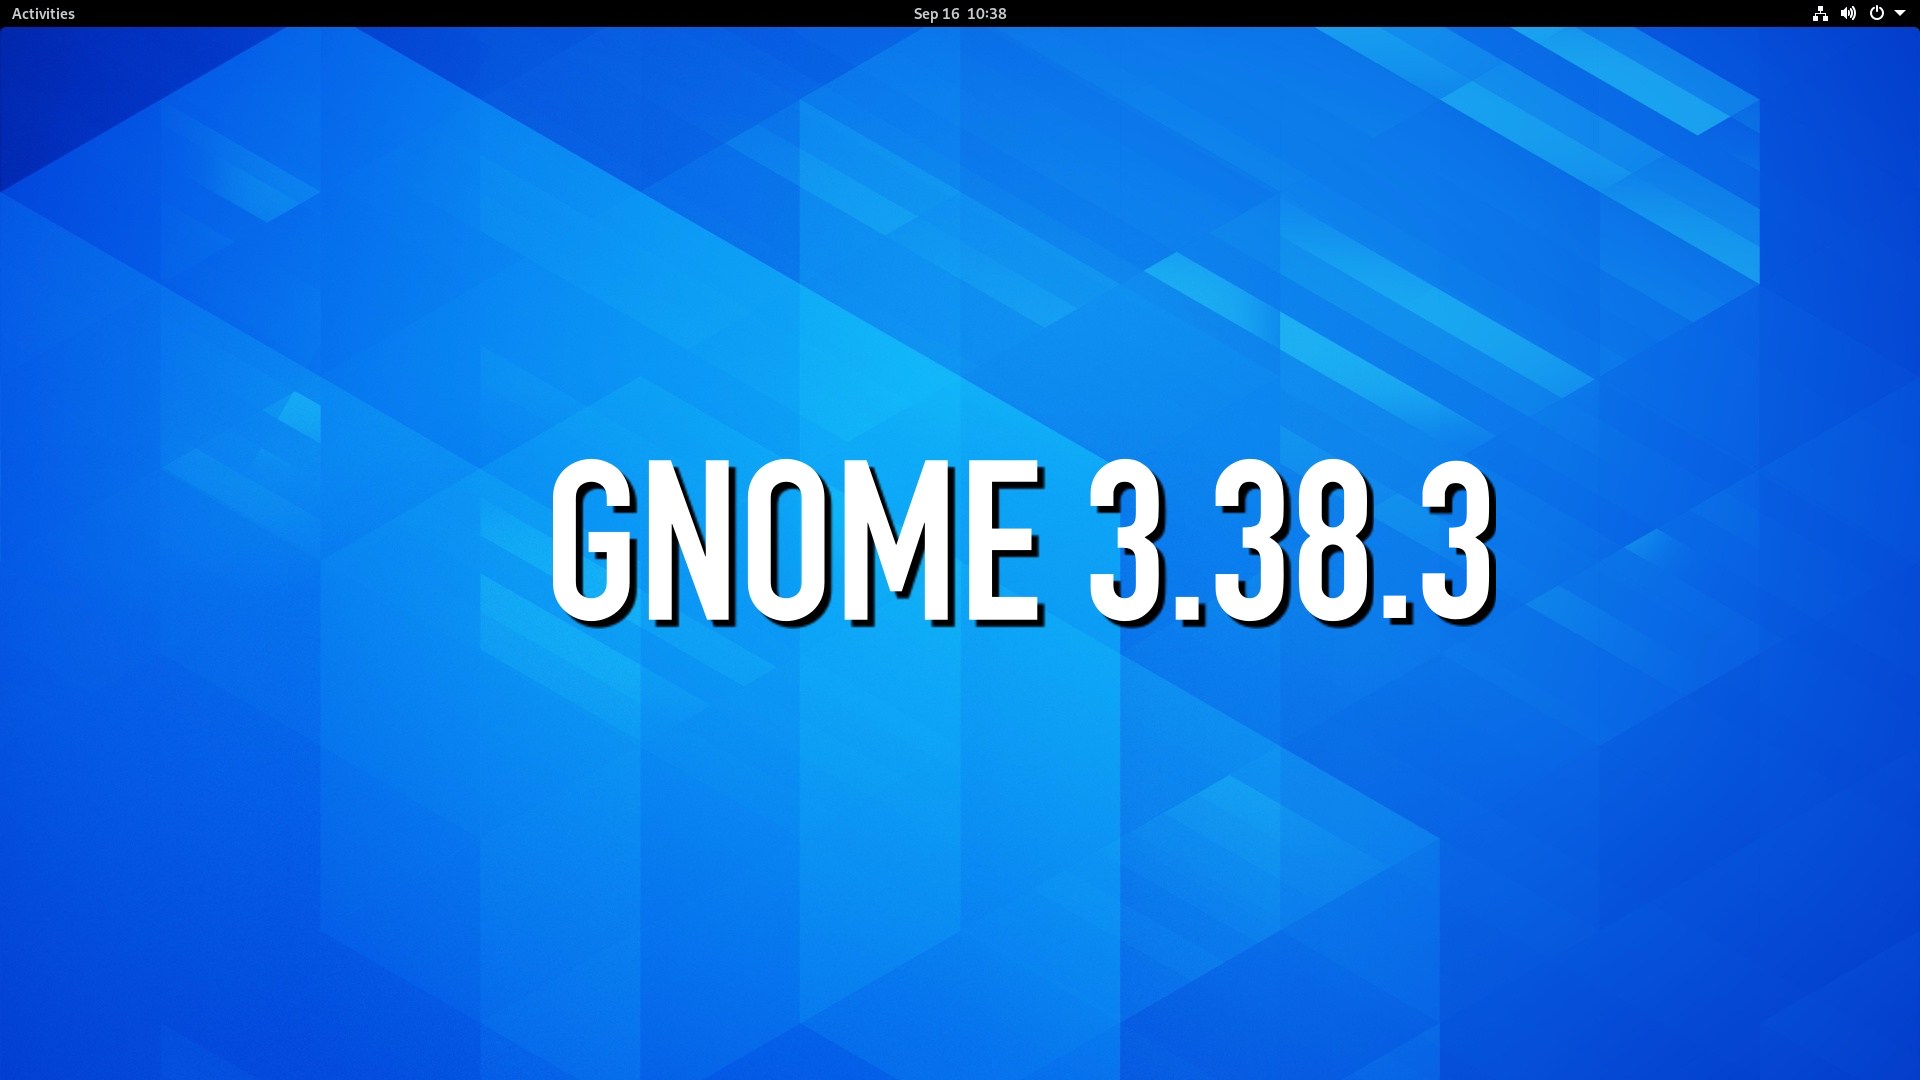 GNOME 3.38.3 Released with Better Support for Multi-Monitor Setups, Many Improvements